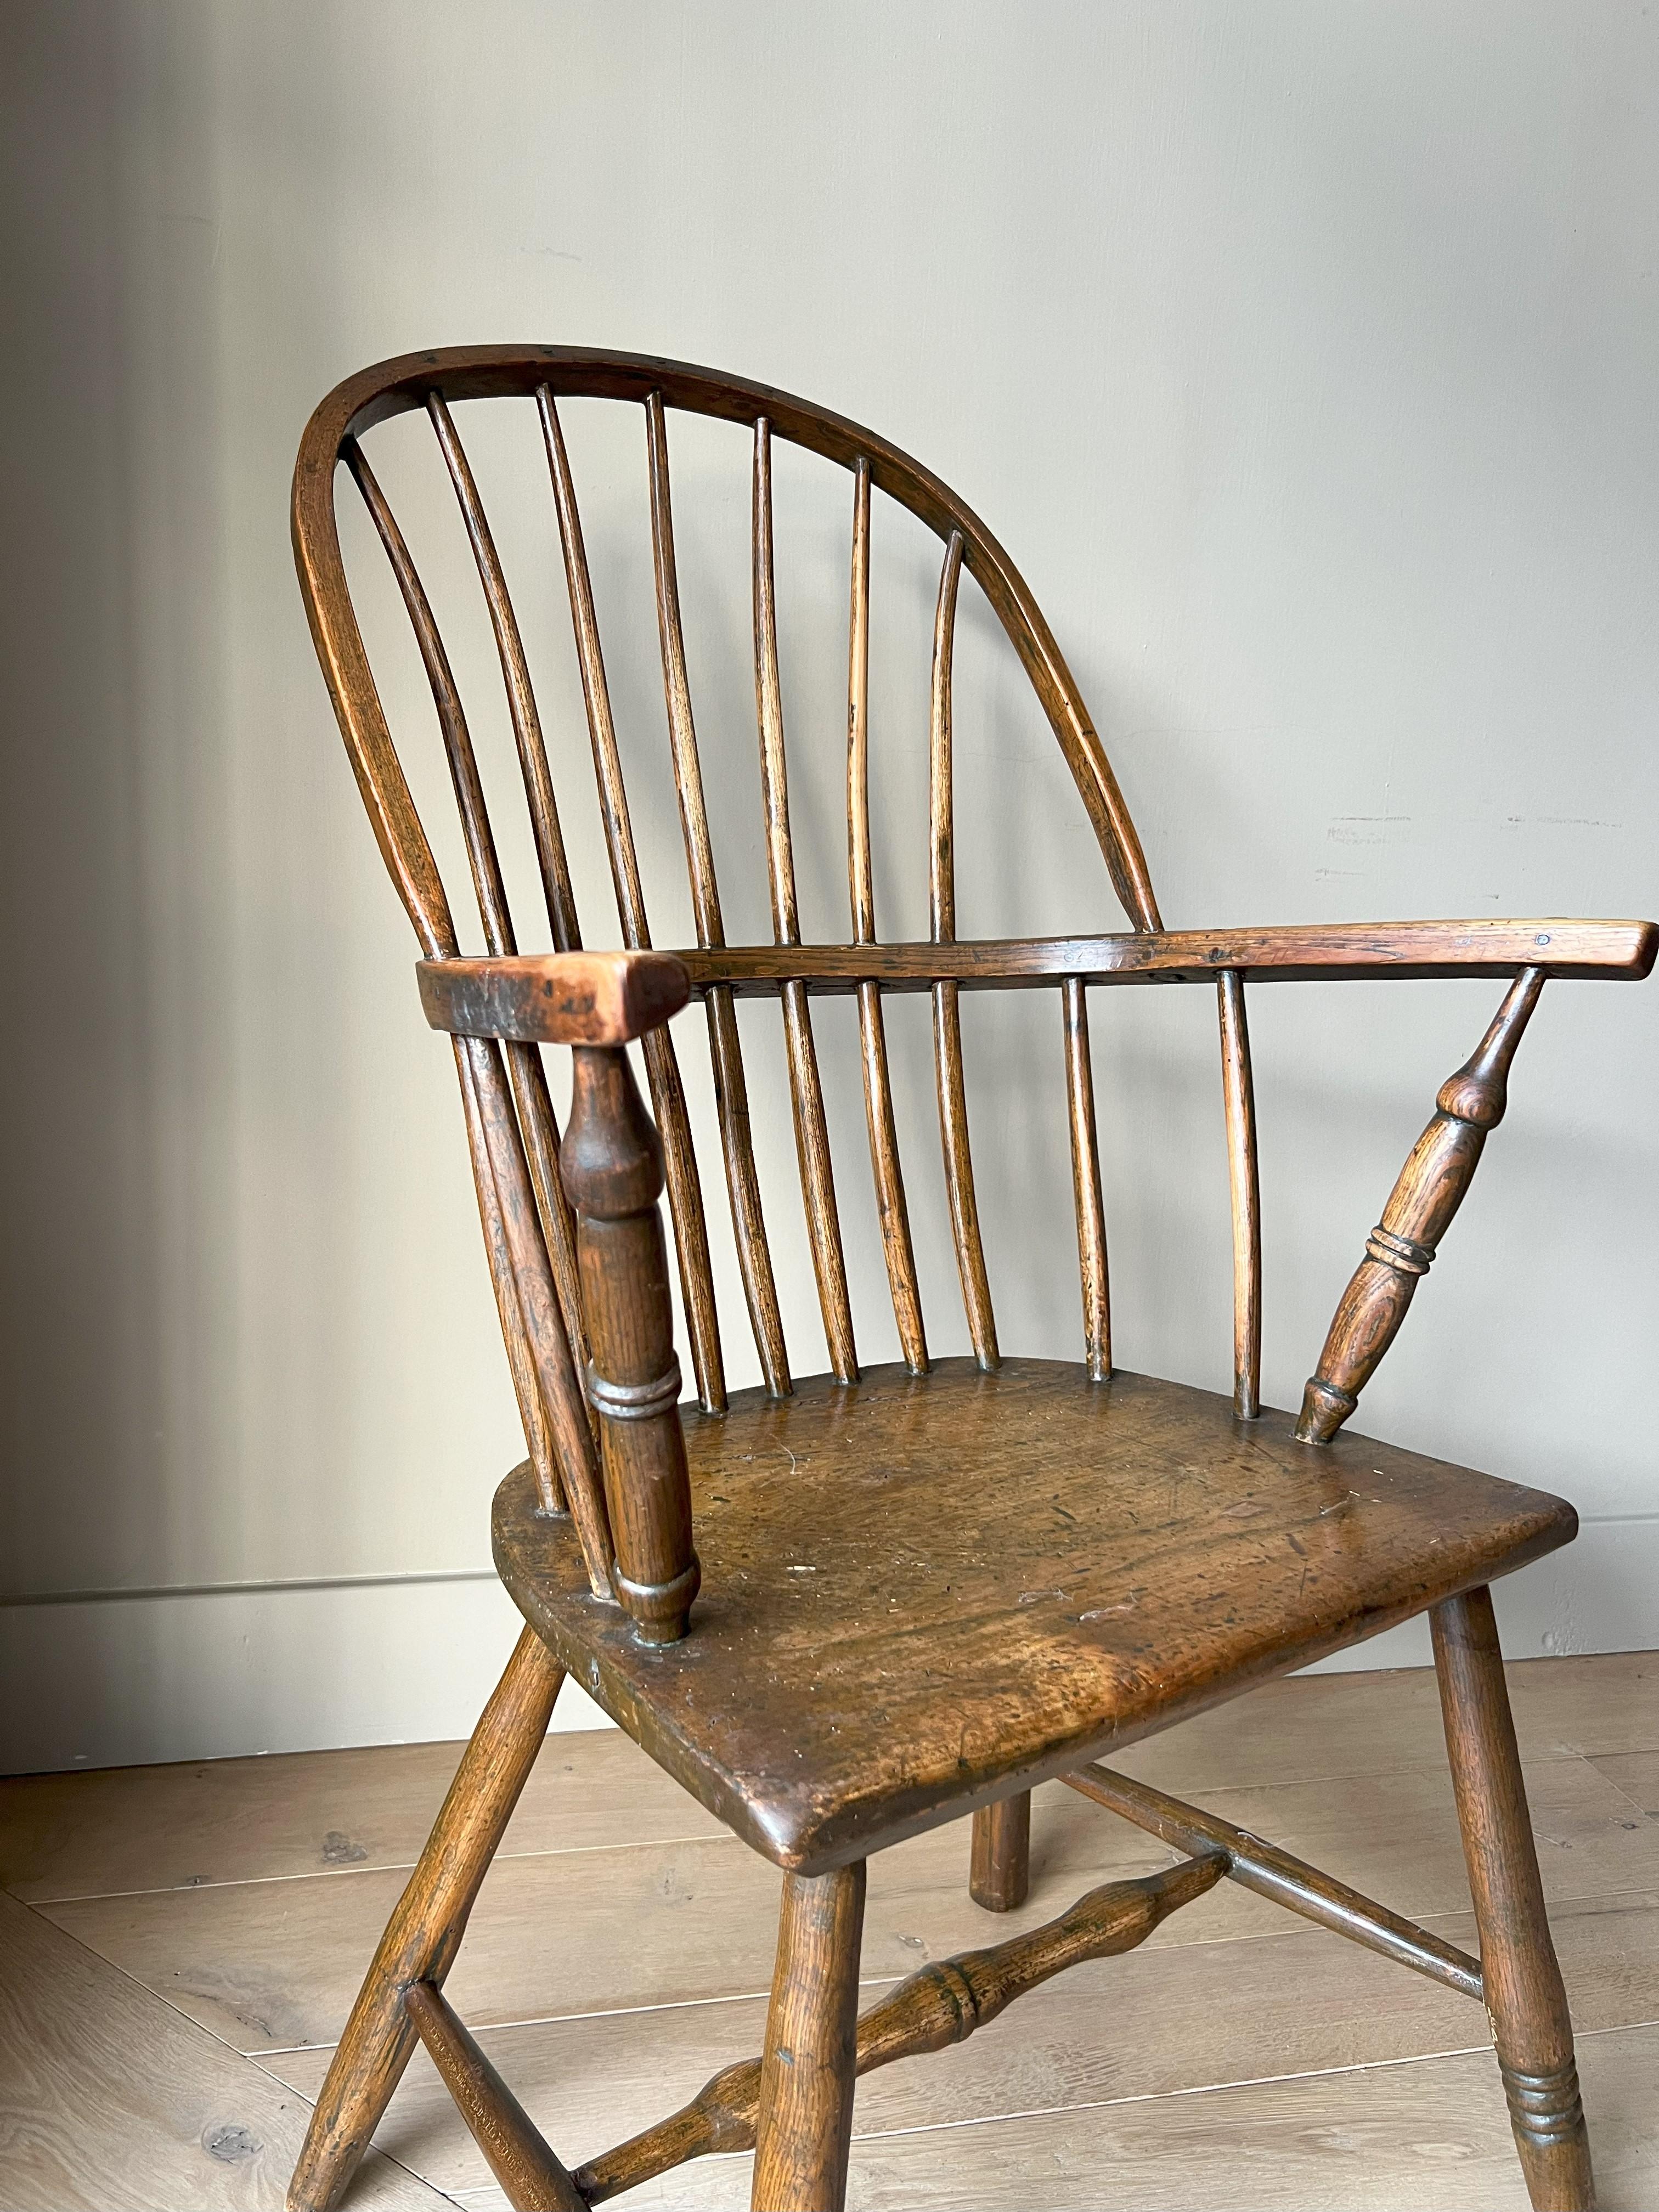 Good example of a primitive Windsor chair. All original with ash and elm wood. Not 100 % sturdy but verry usable. Beautiful patina and proportions. 